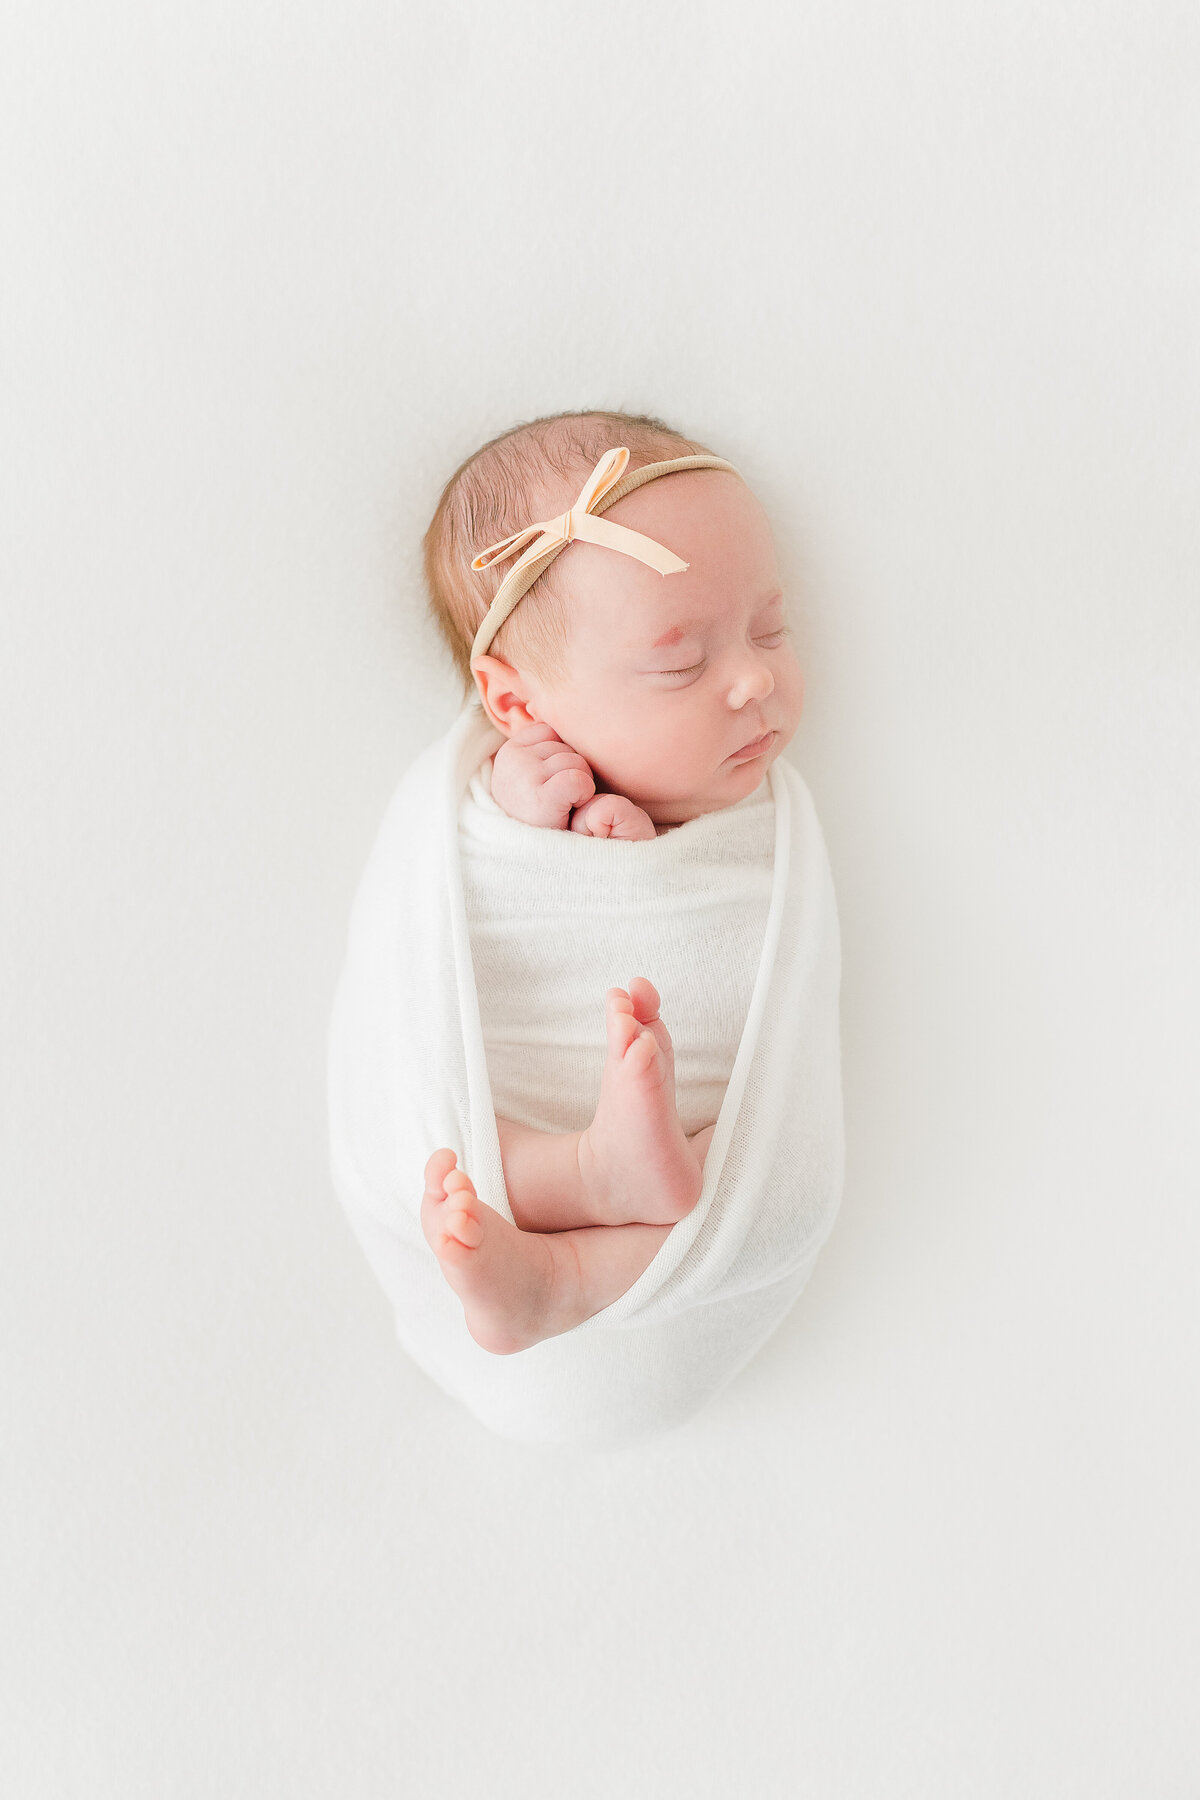 A DC newborn photography image of a little baby girl swaddled with her feet and hands out on a white backdrop